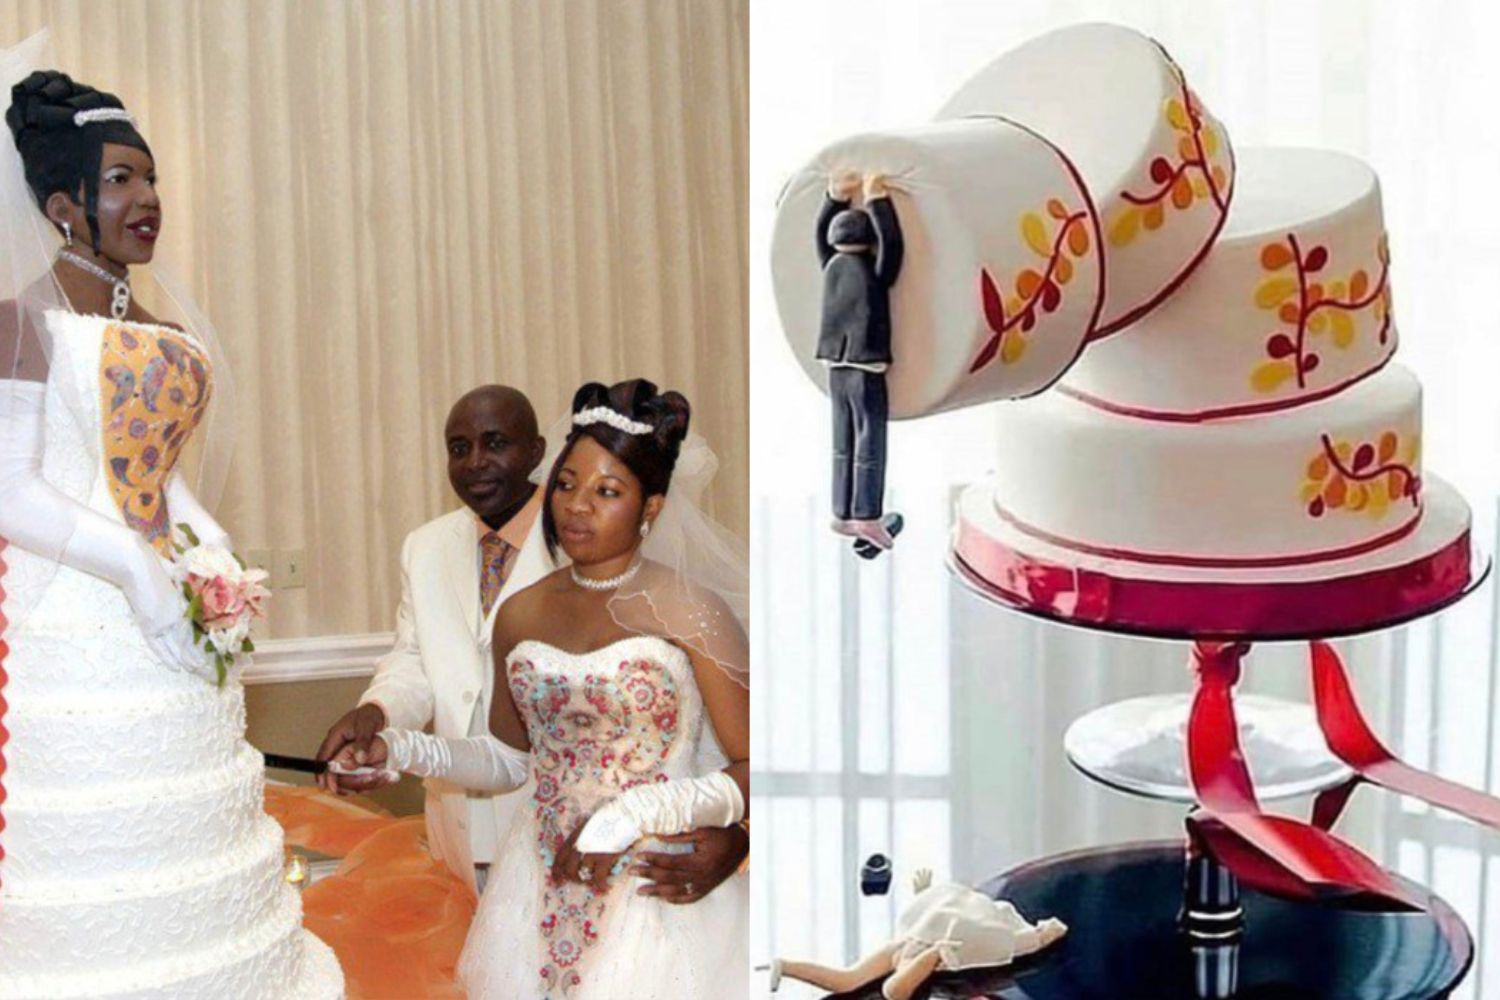 Top more than 80 best wedding cake toppers latest - awesomeenglish.edu.vn